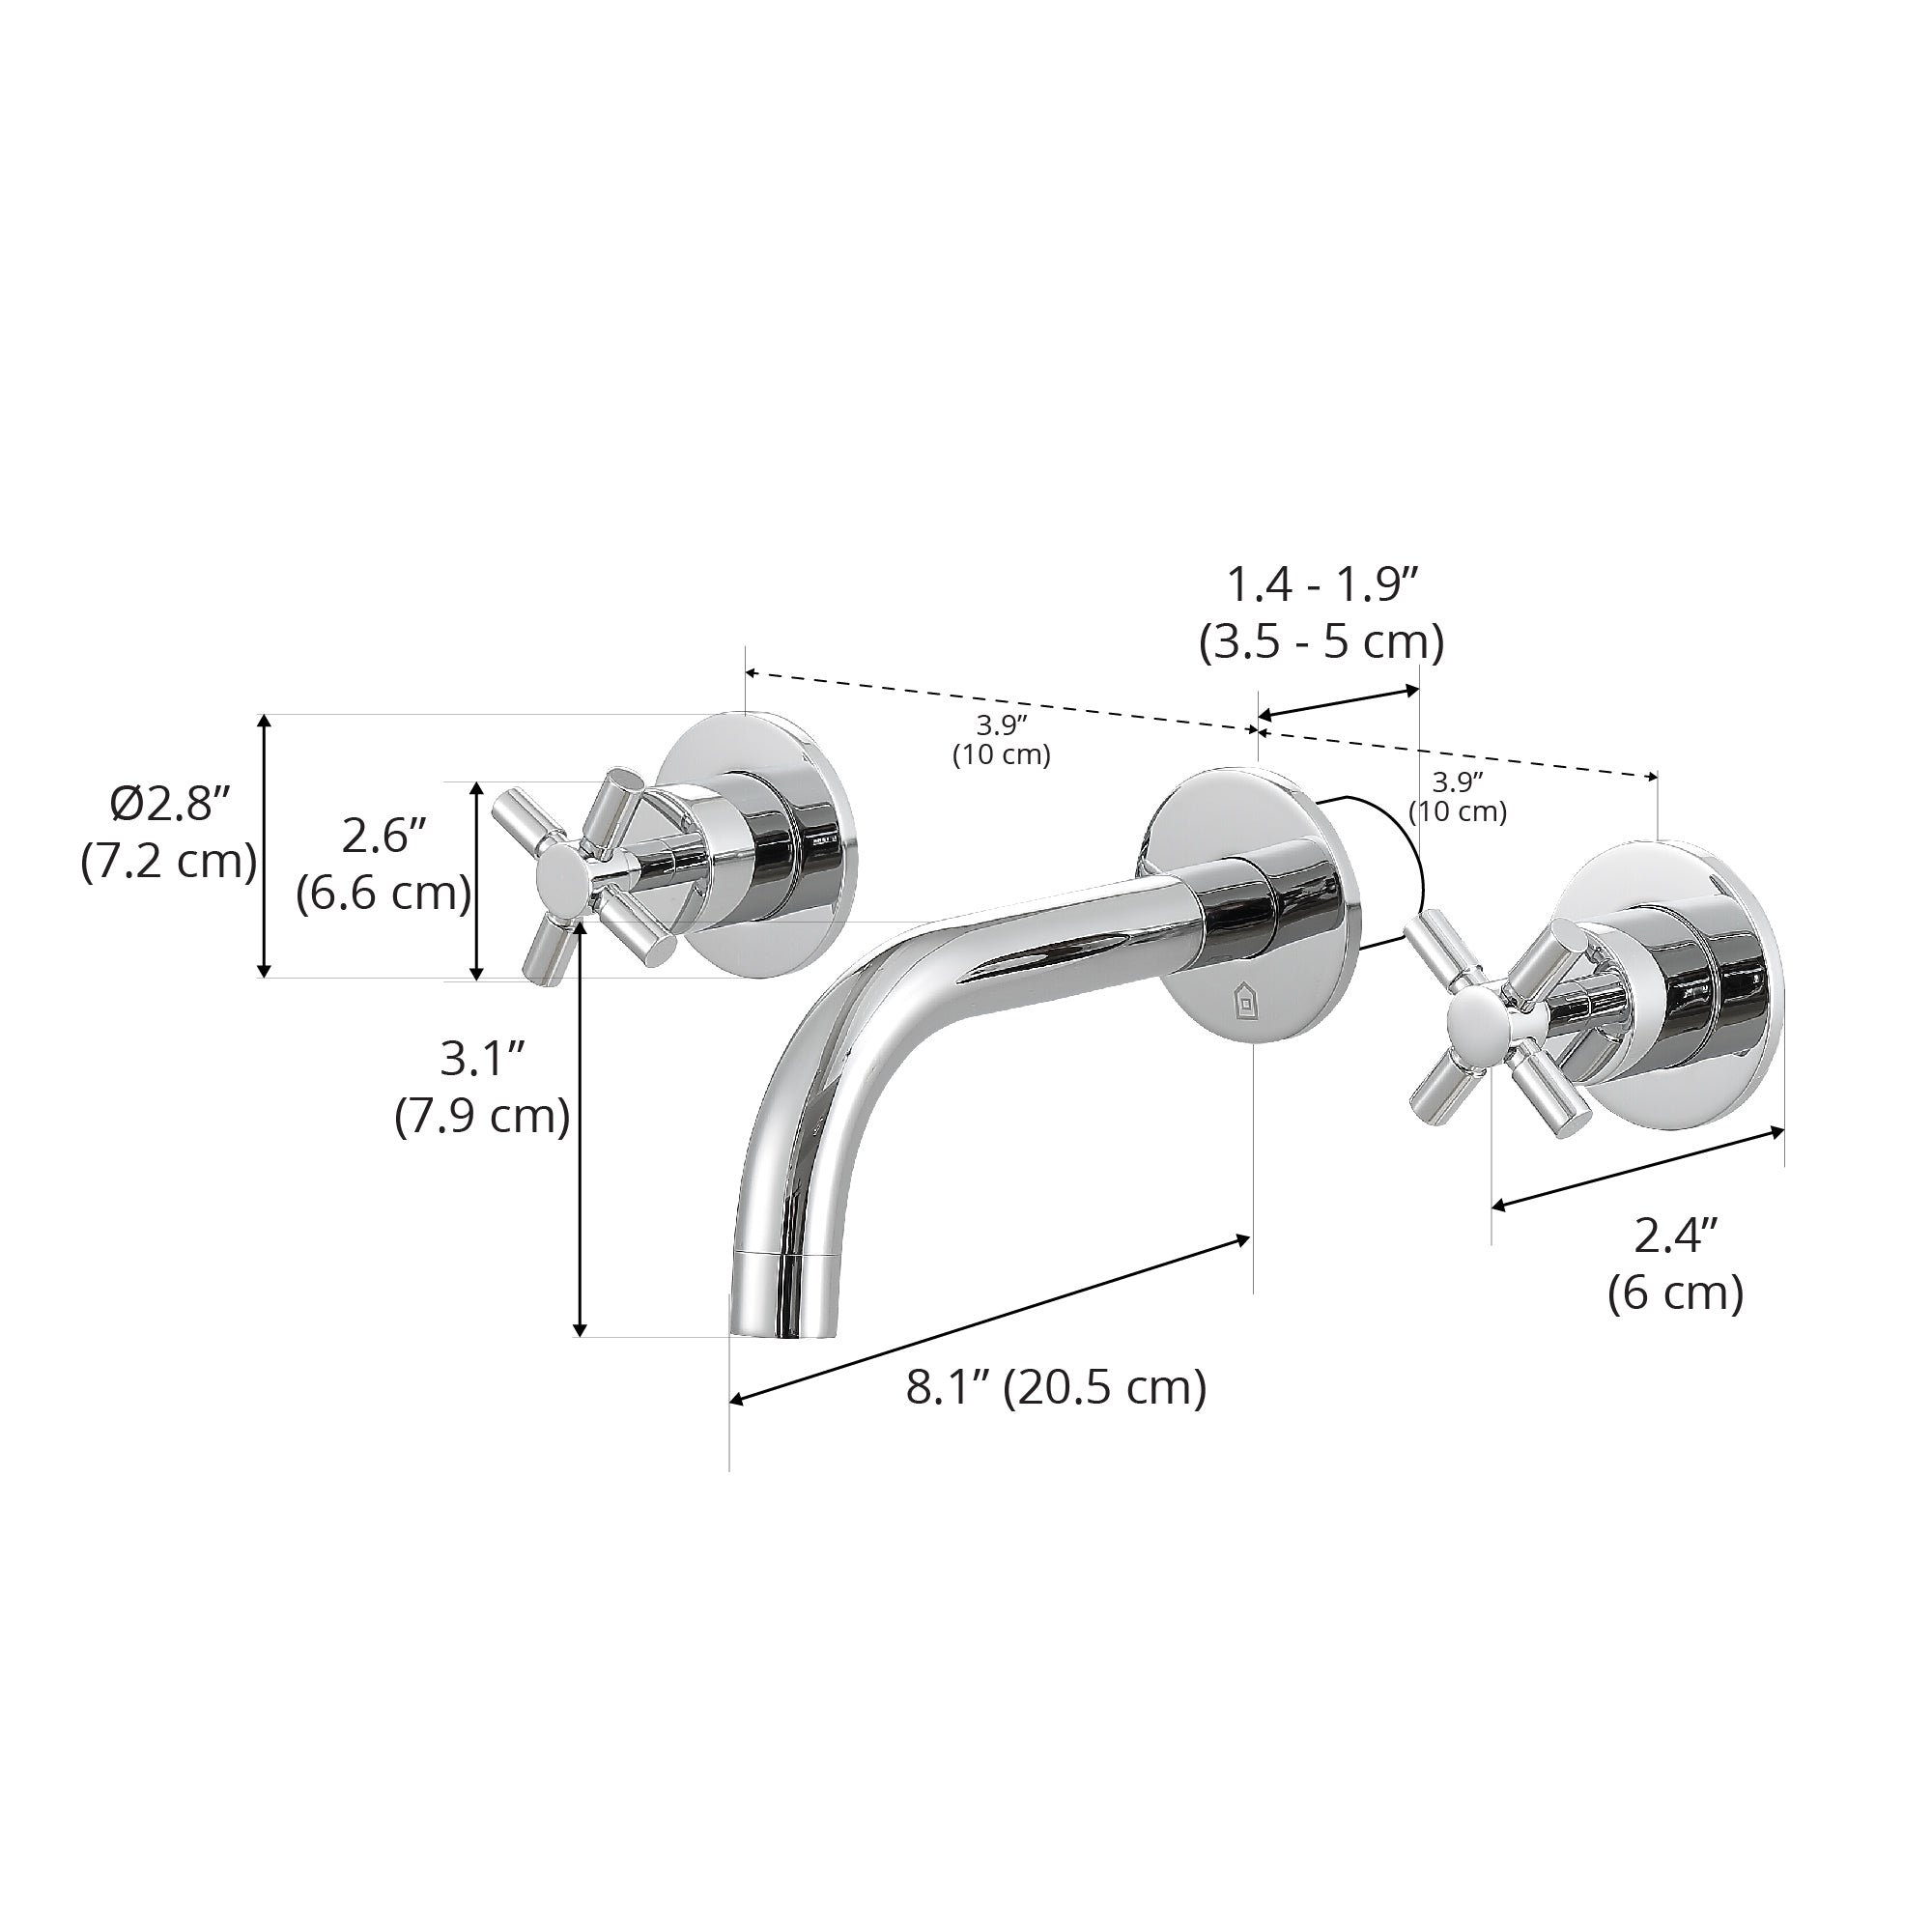 Ancona Prima Two Handle Wall Mounted Bathroom Faucet in Chrome